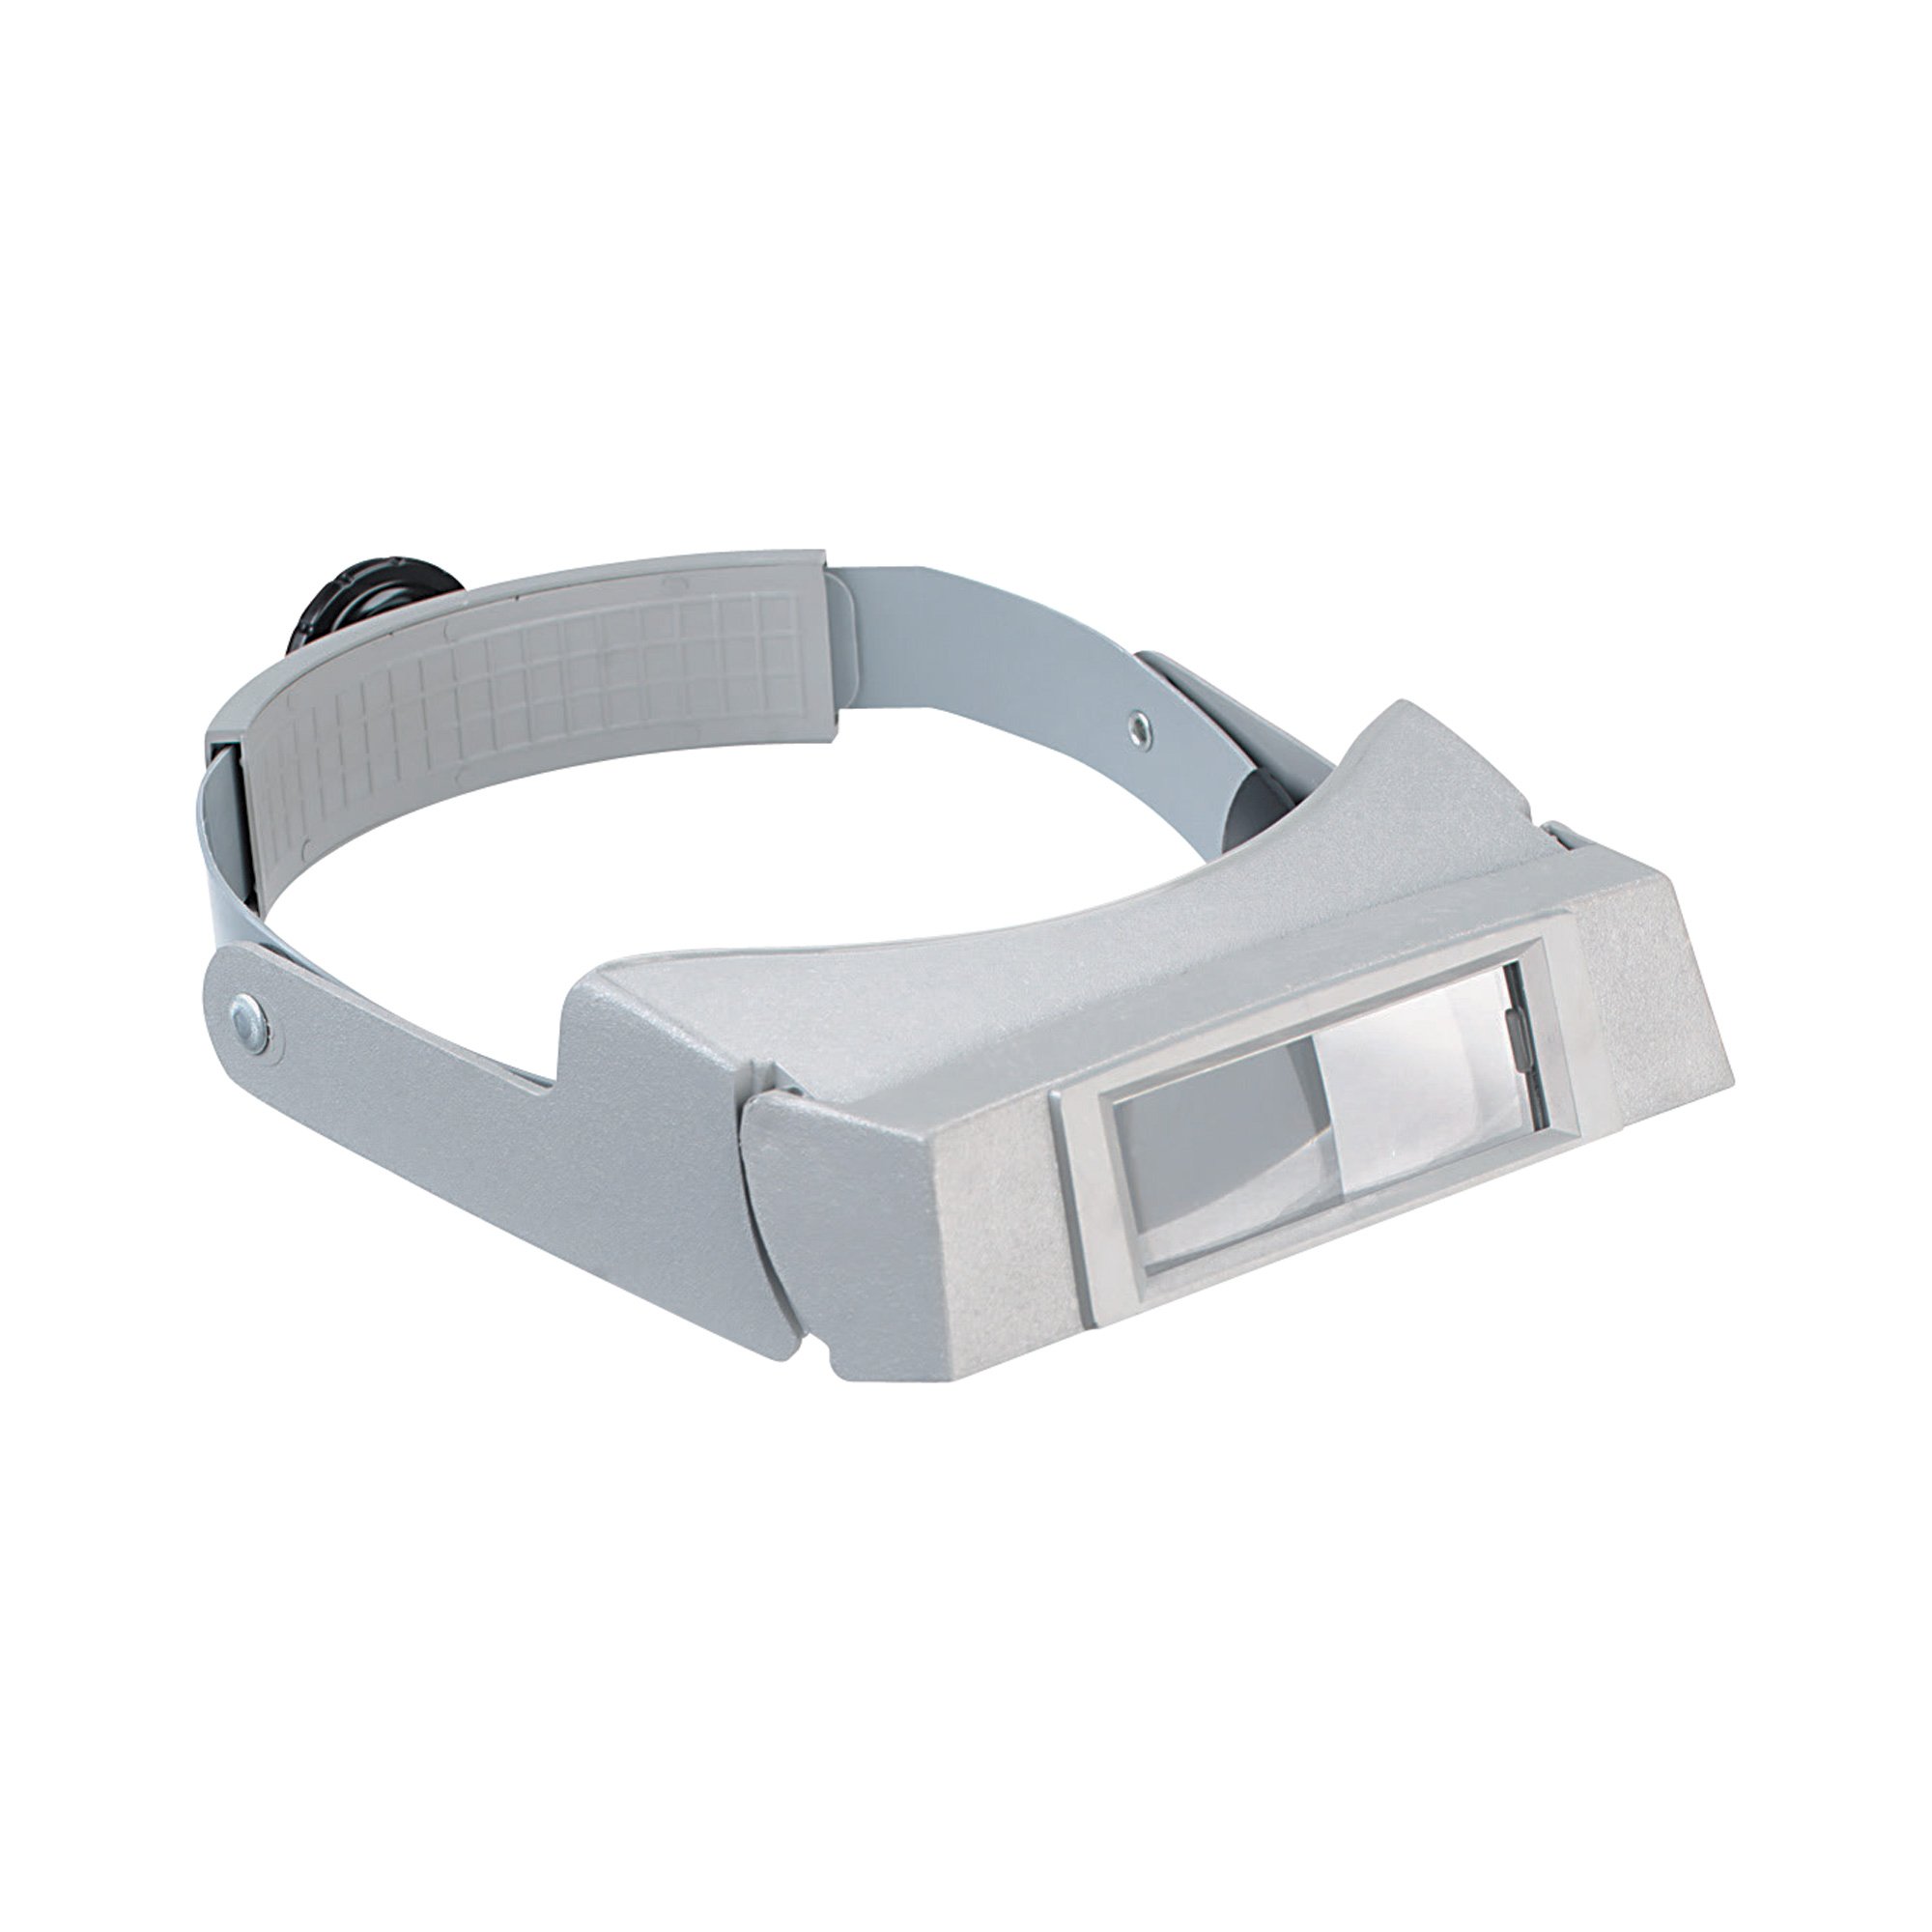 T and E Tools Deluxe Headband Magnifier